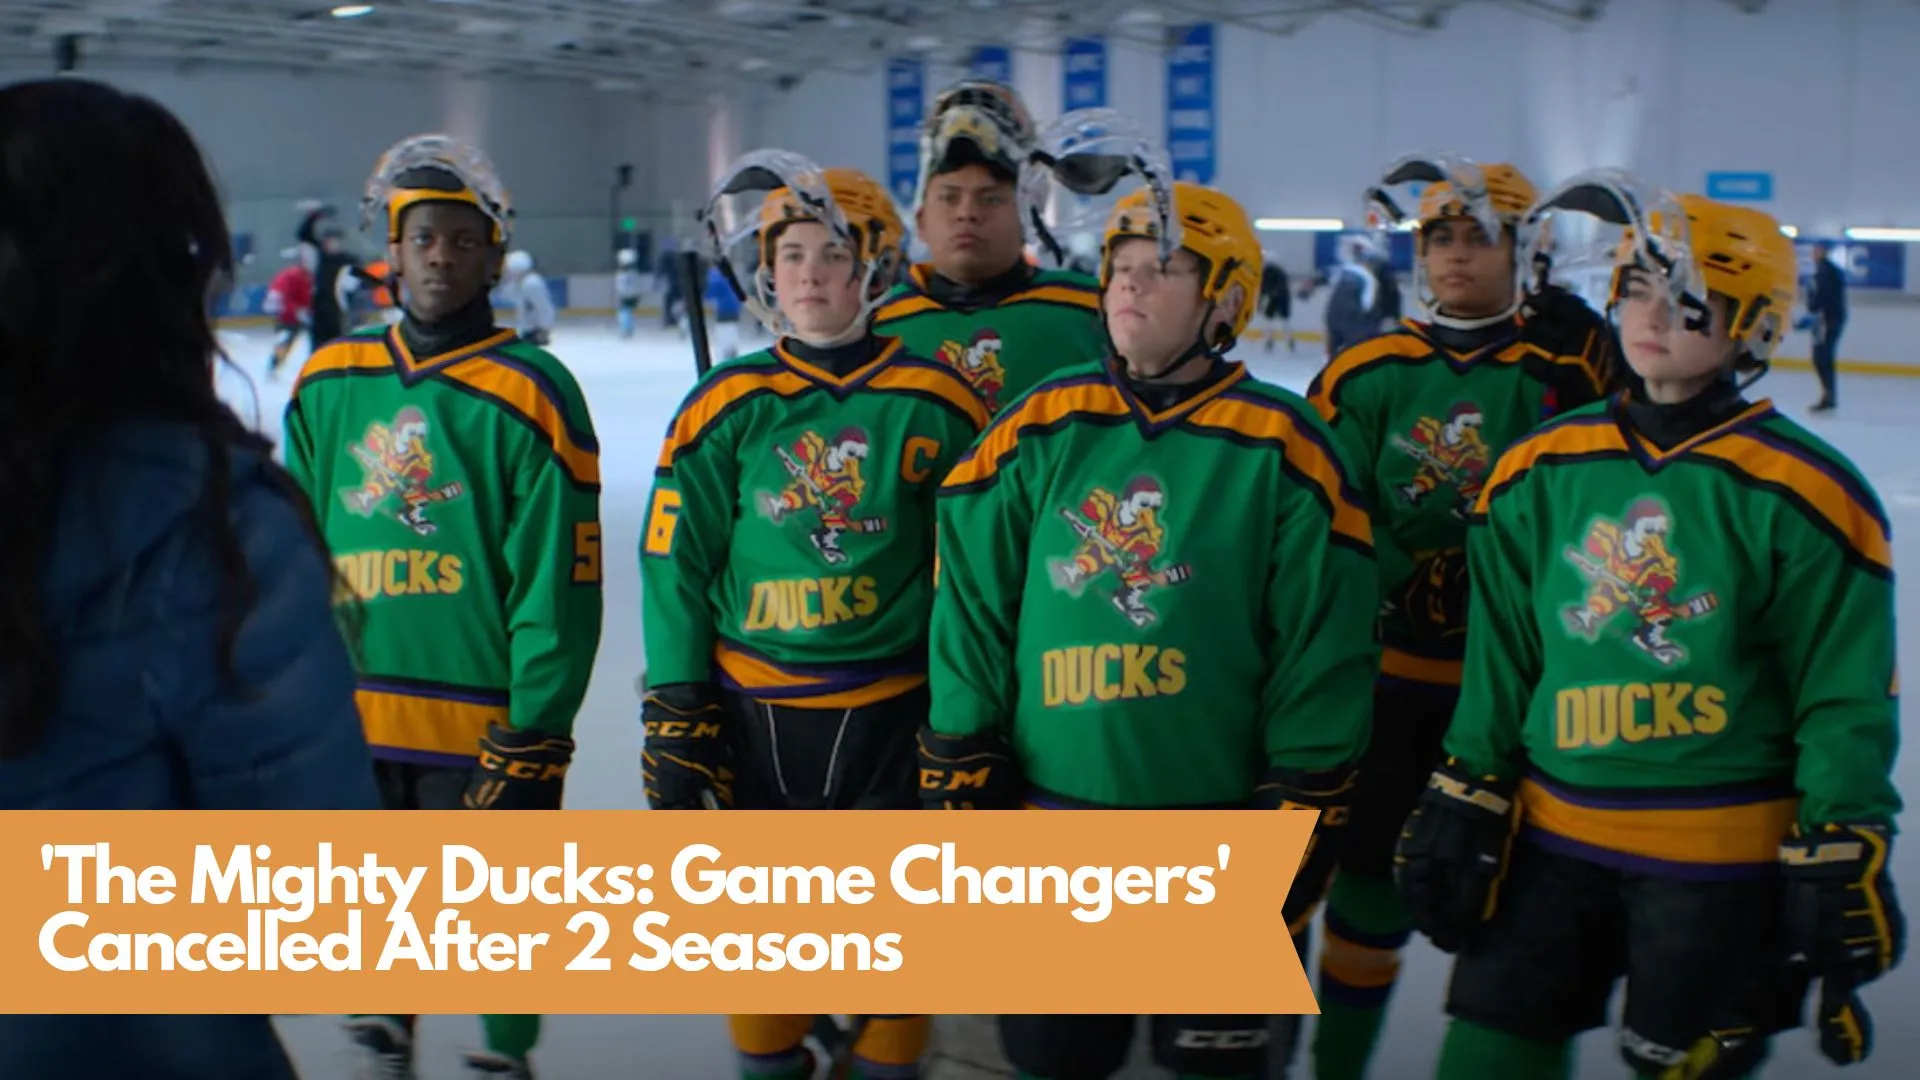 'The Mighty Ducks' Game Changers' Cancelled After 2 Seasons (Image credit: syfy)